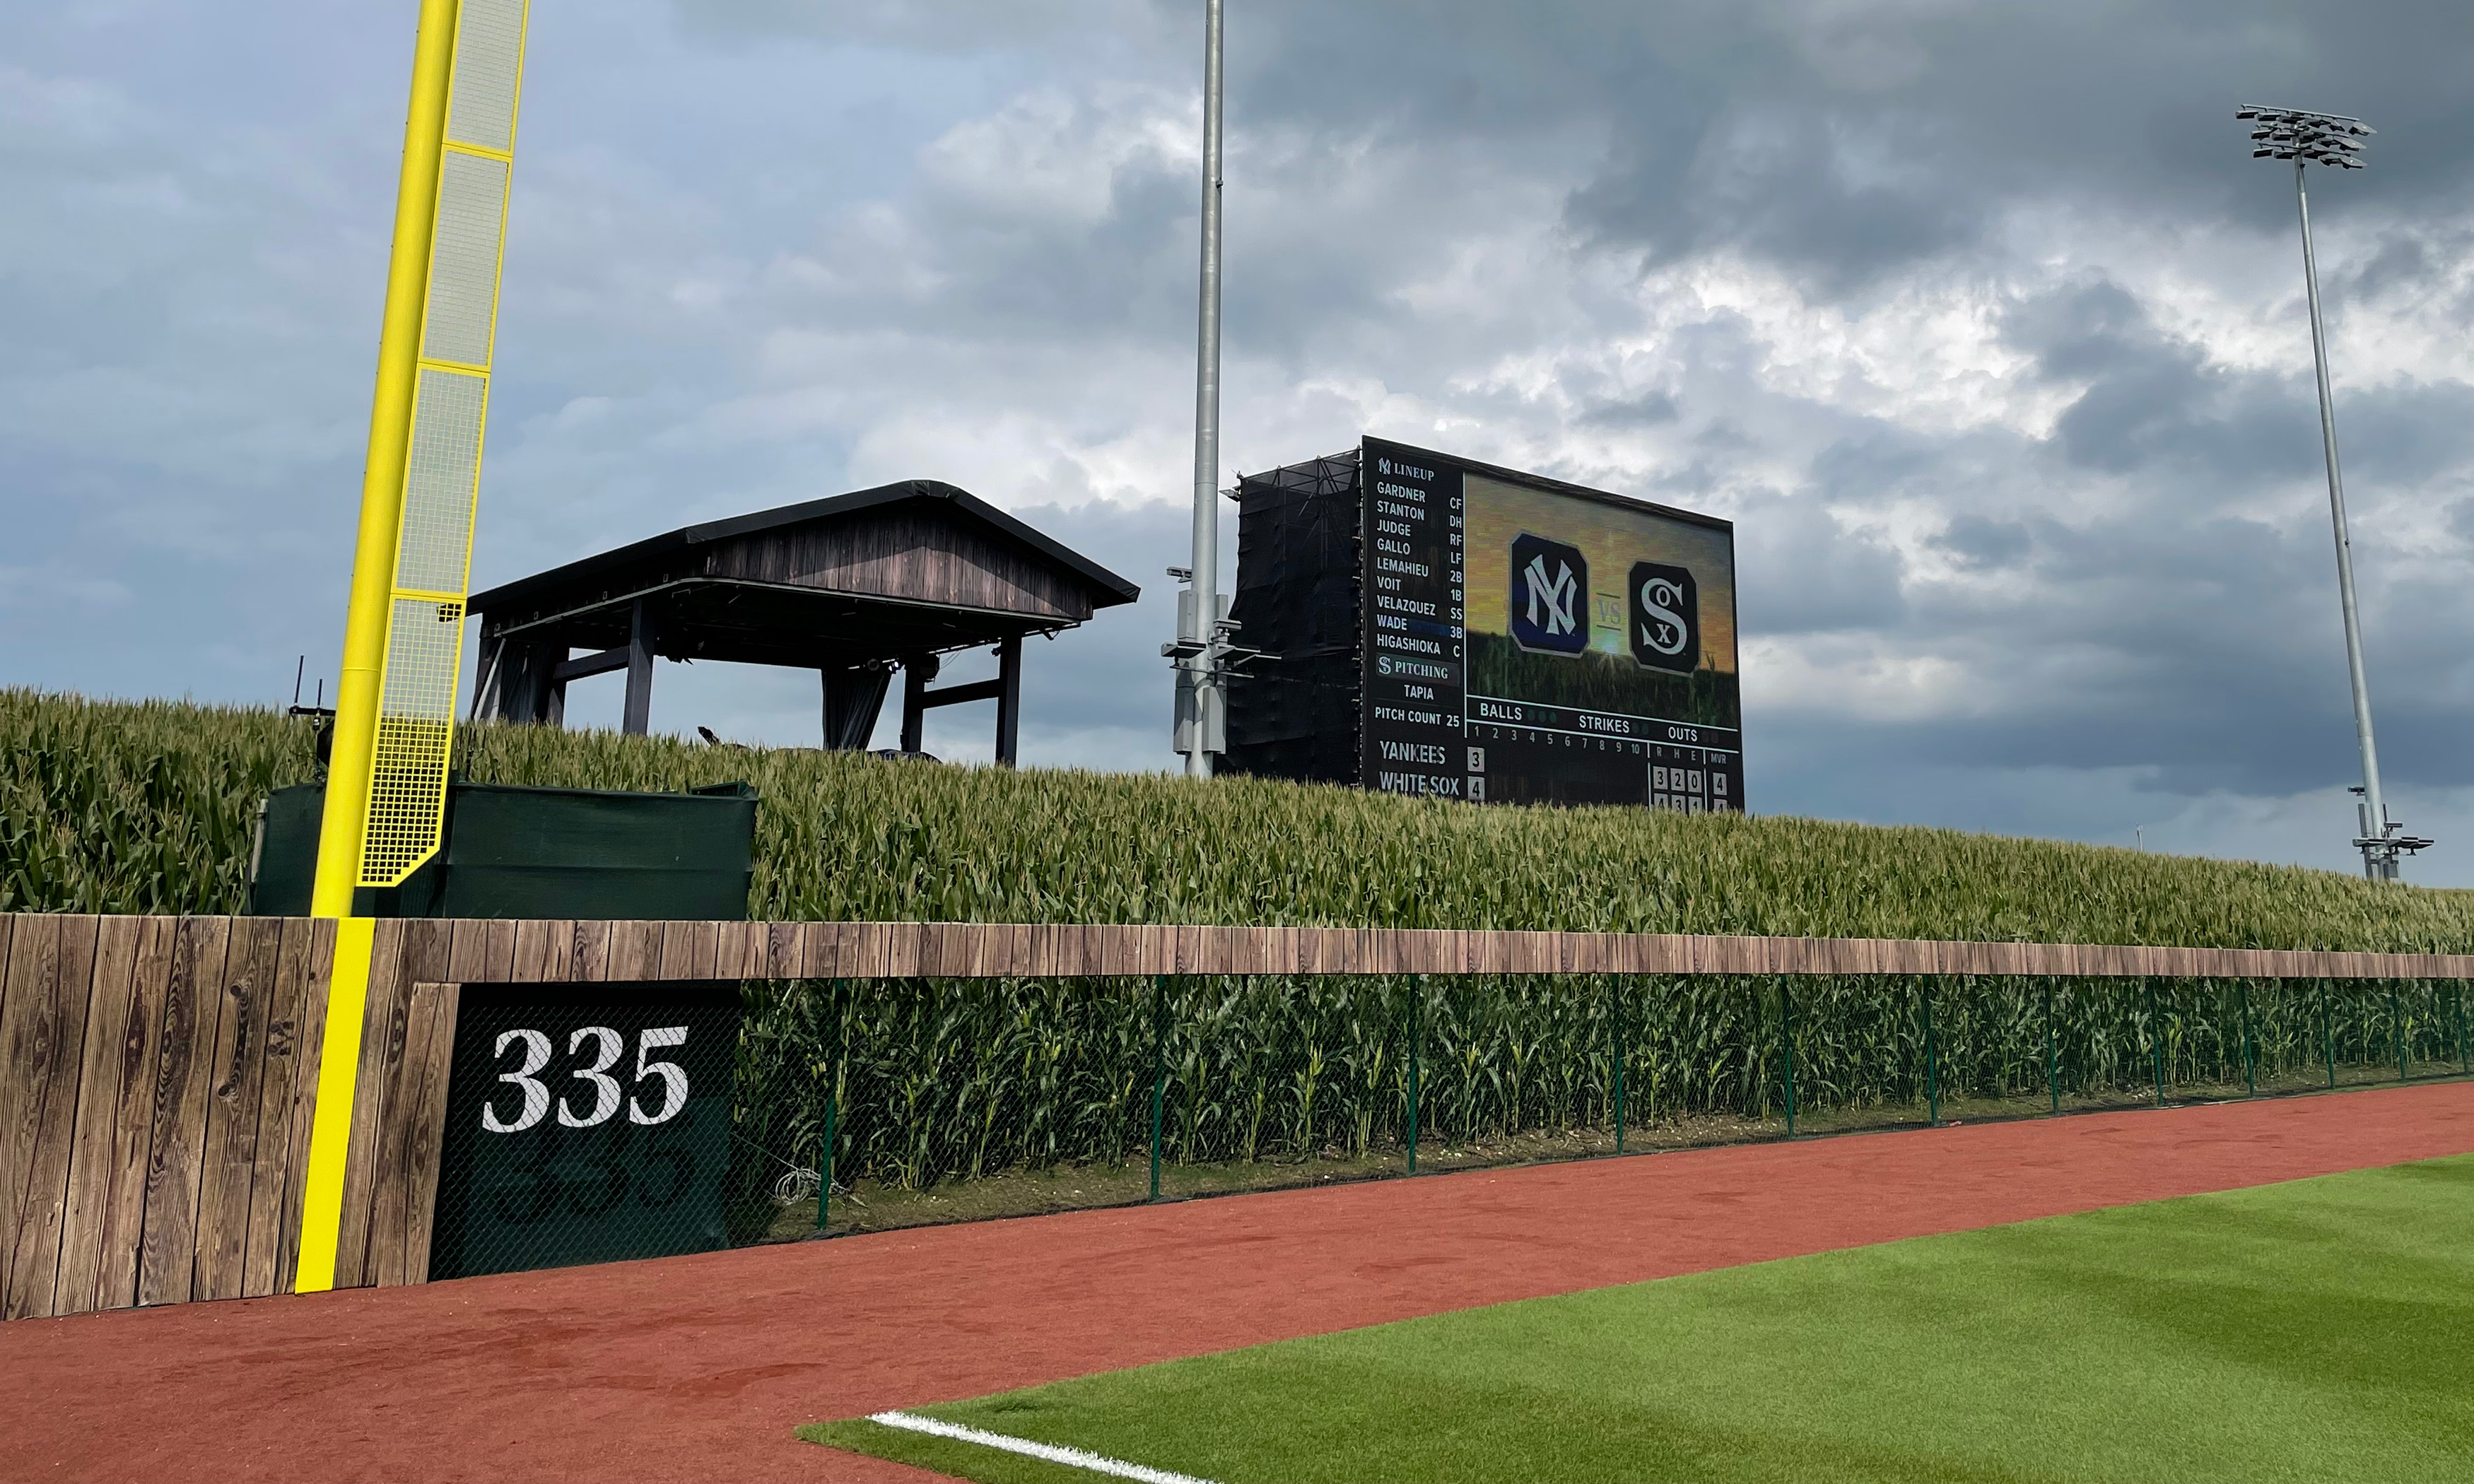 What you need to know about MLB's Field of Dreams ballpark in Iowa